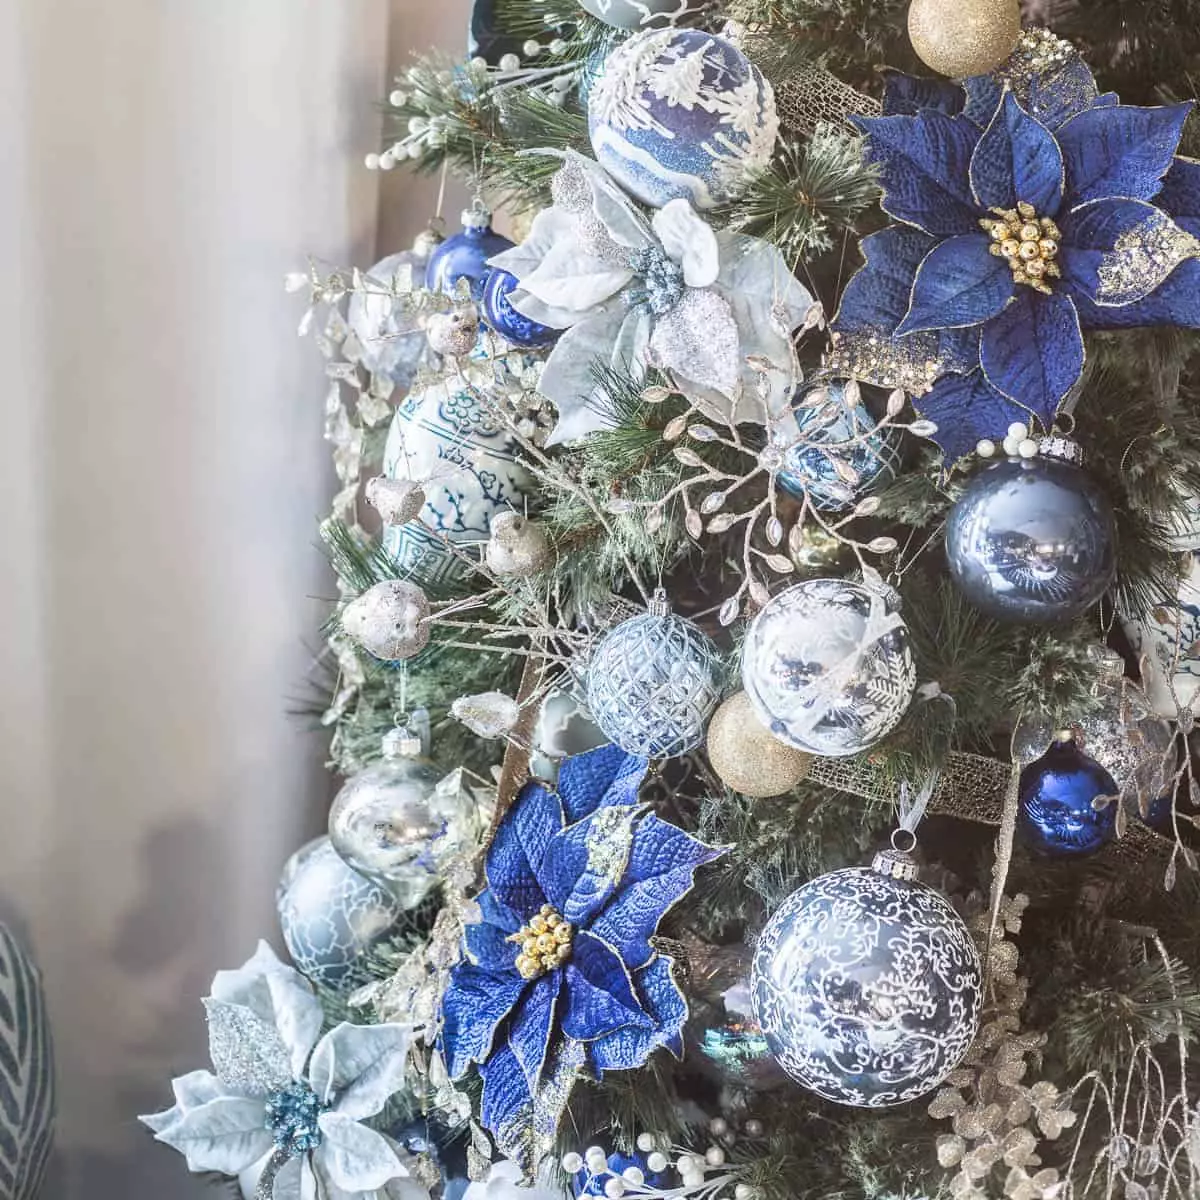 How to decorate the Christmas tree in blue-silver color? 30 photos How to dress up with balls and other decorations in blue and silver tones? 7627_7